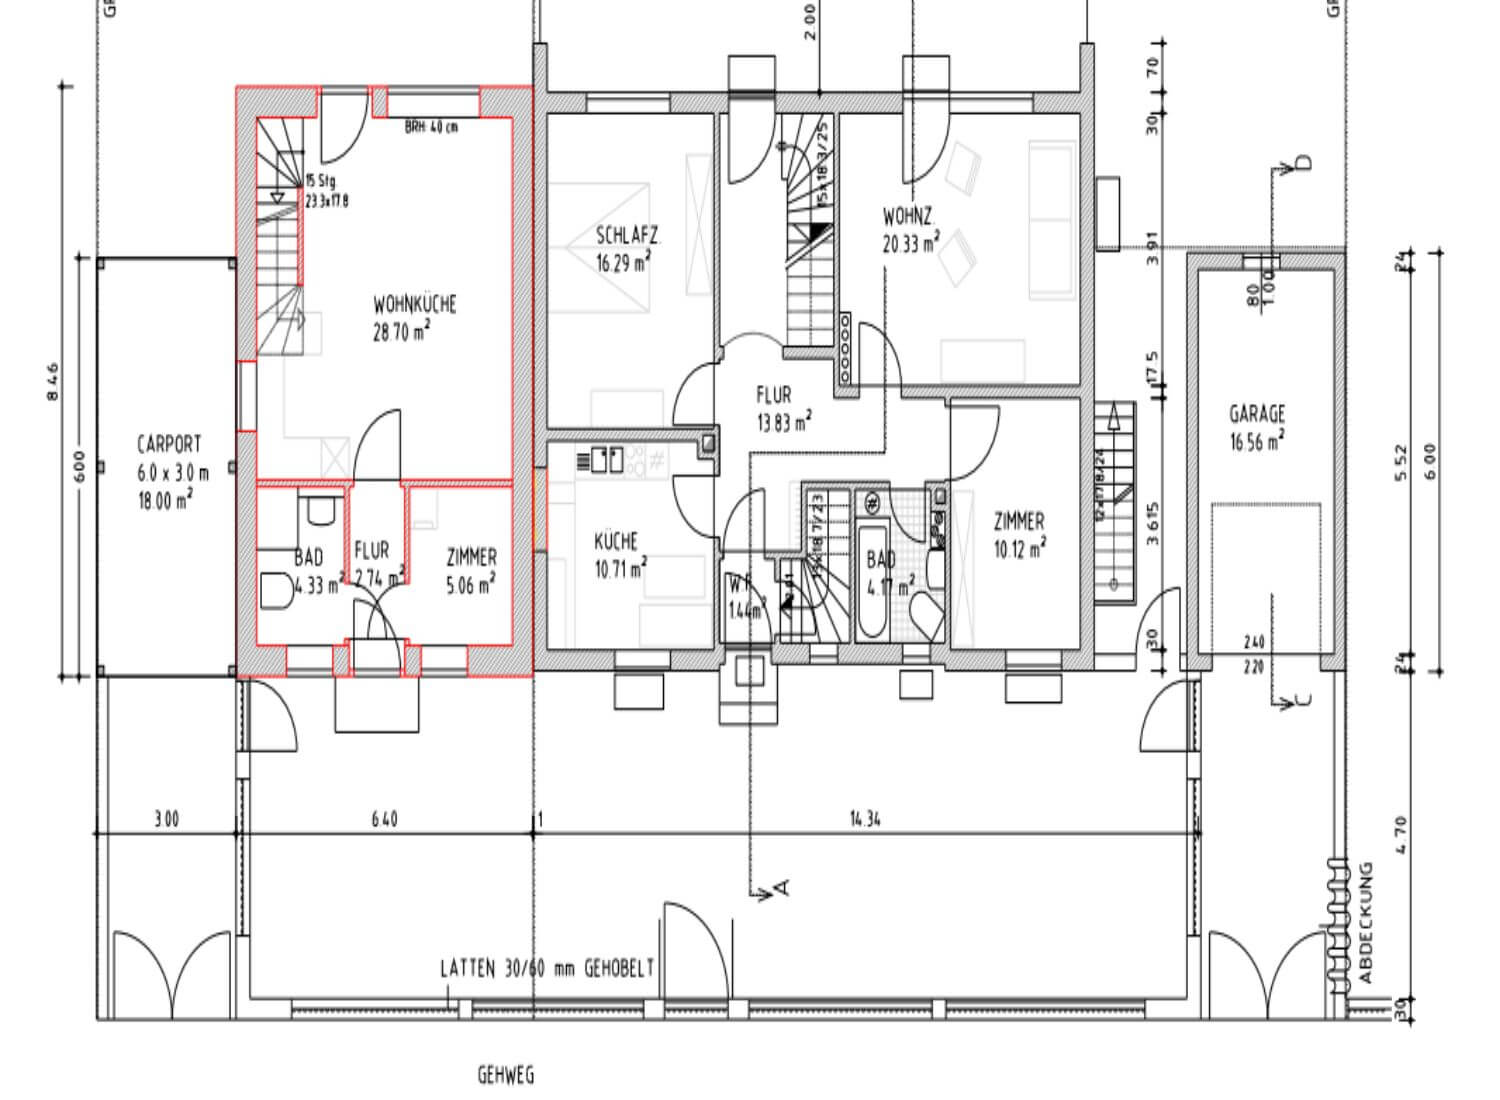 structural-shop-drawings-services